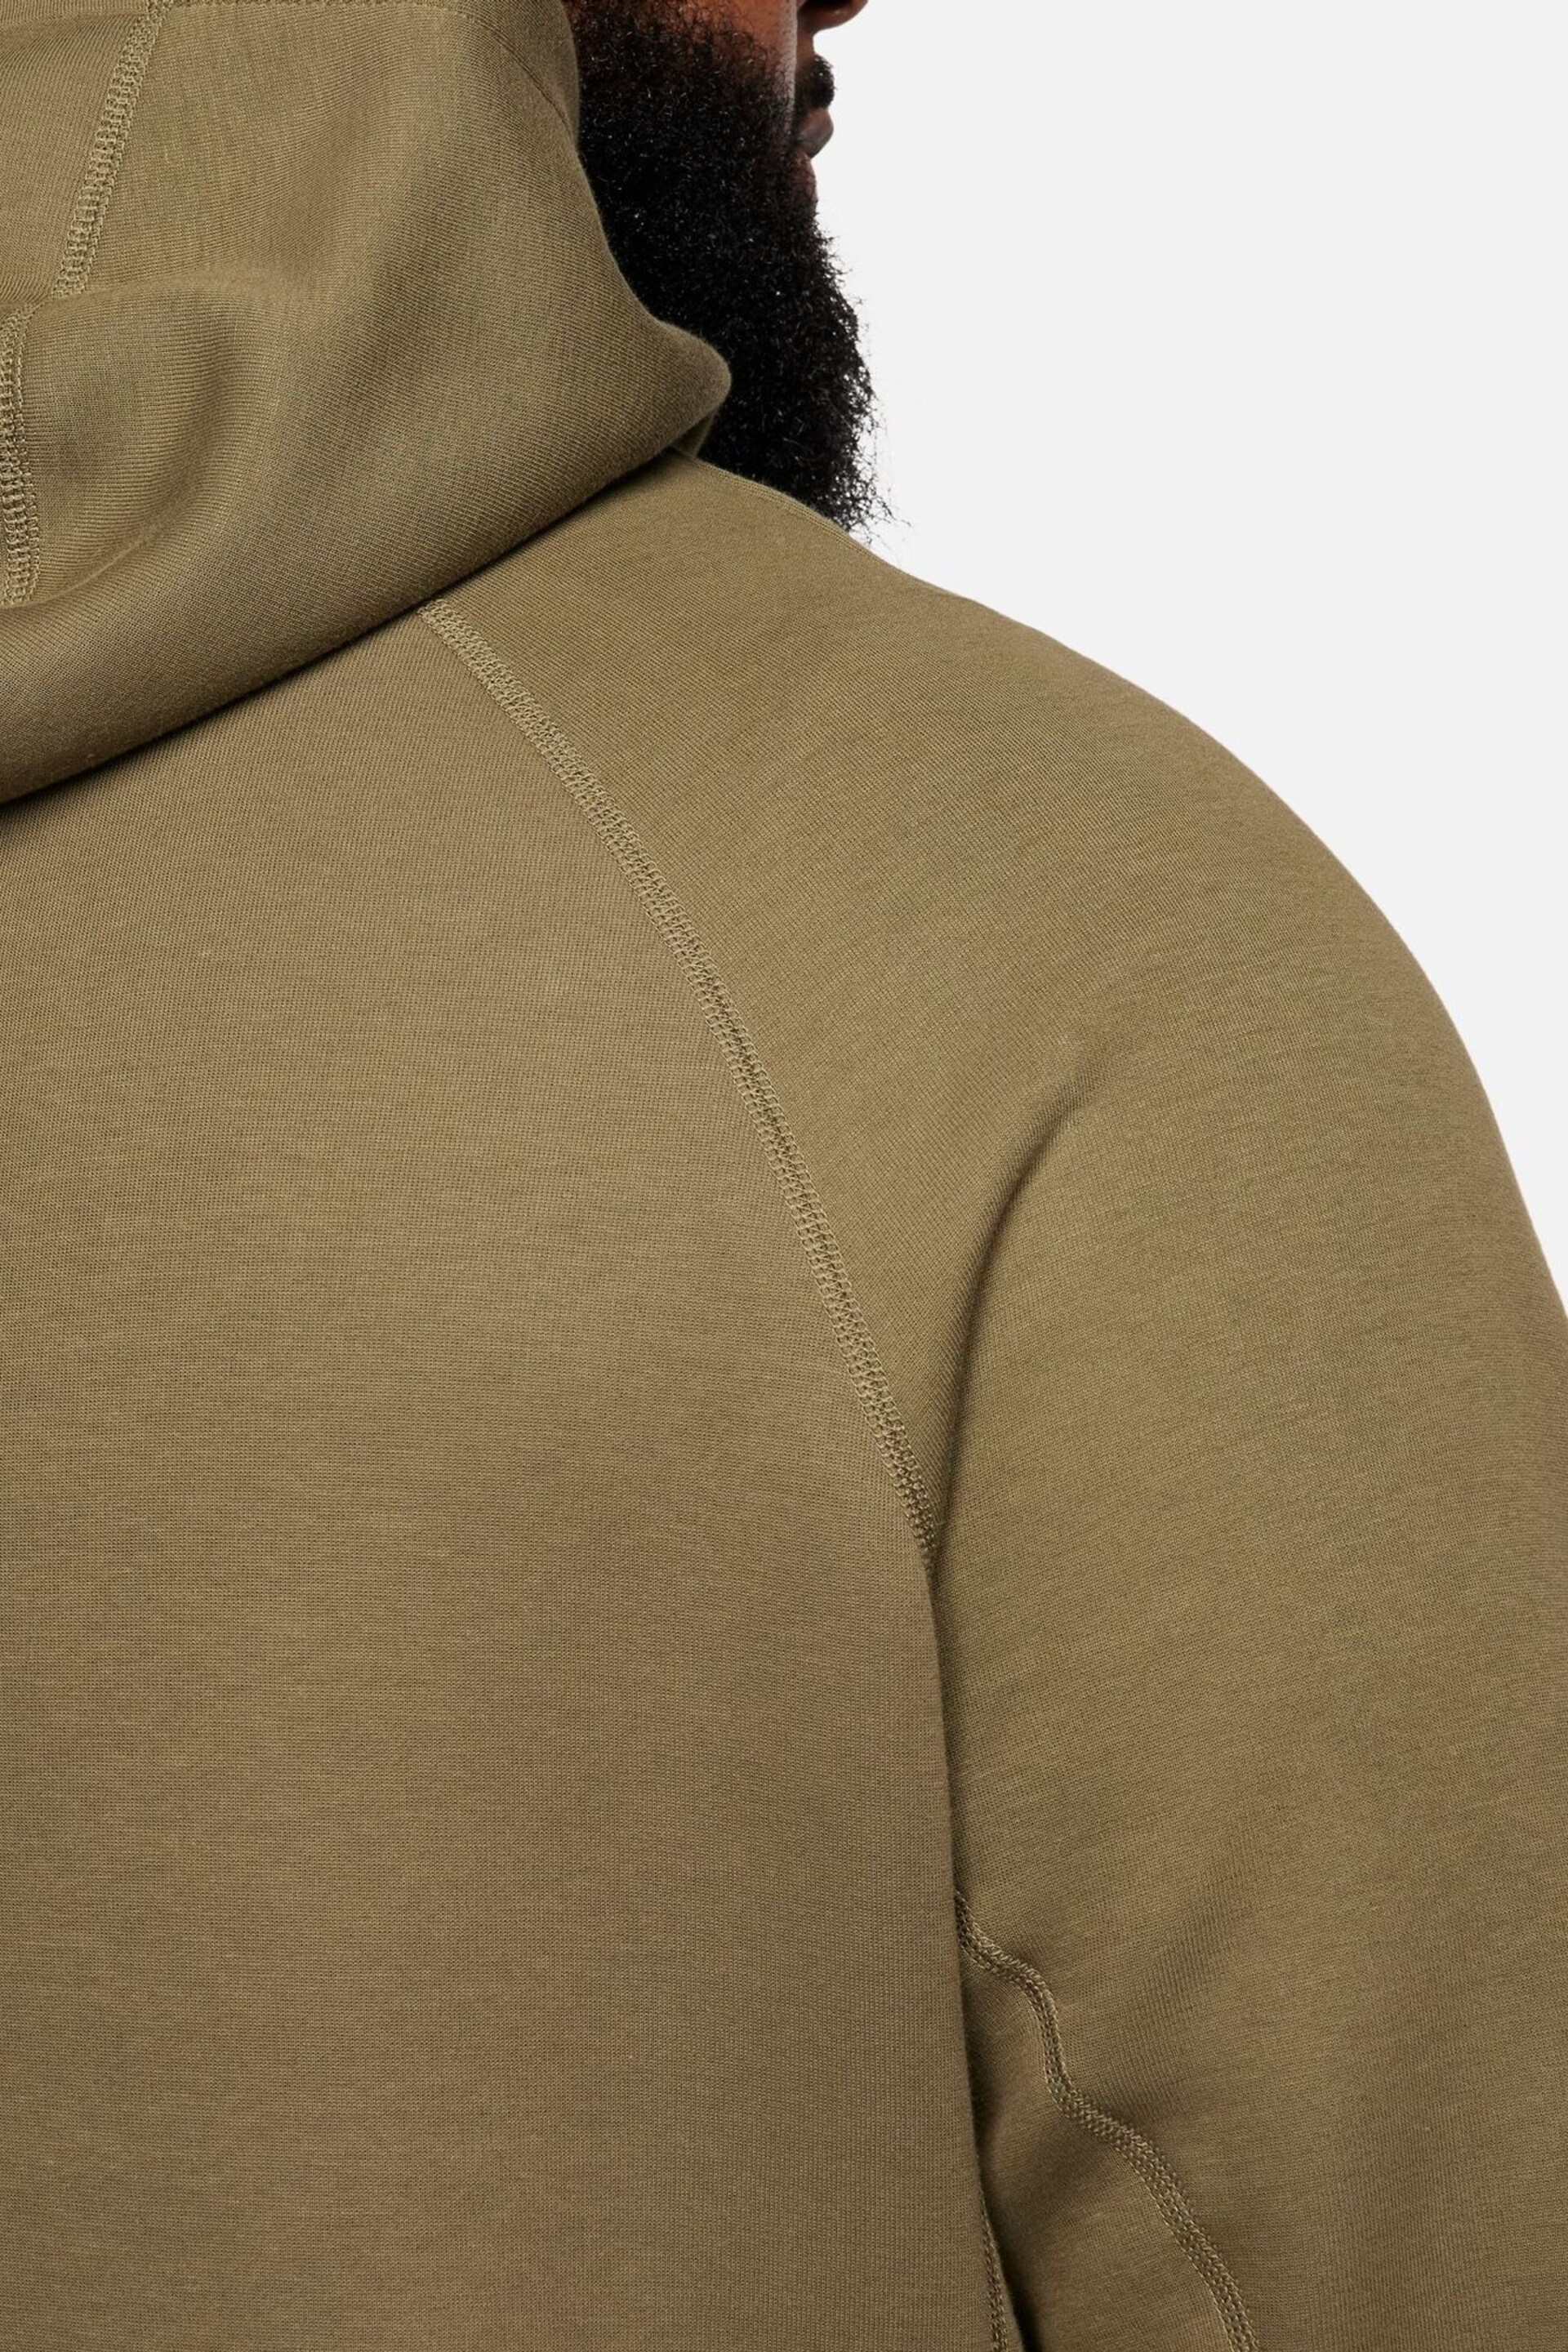 Nike Olive Green Tech Fleece Pullover Hoodie - Image 9 of 17